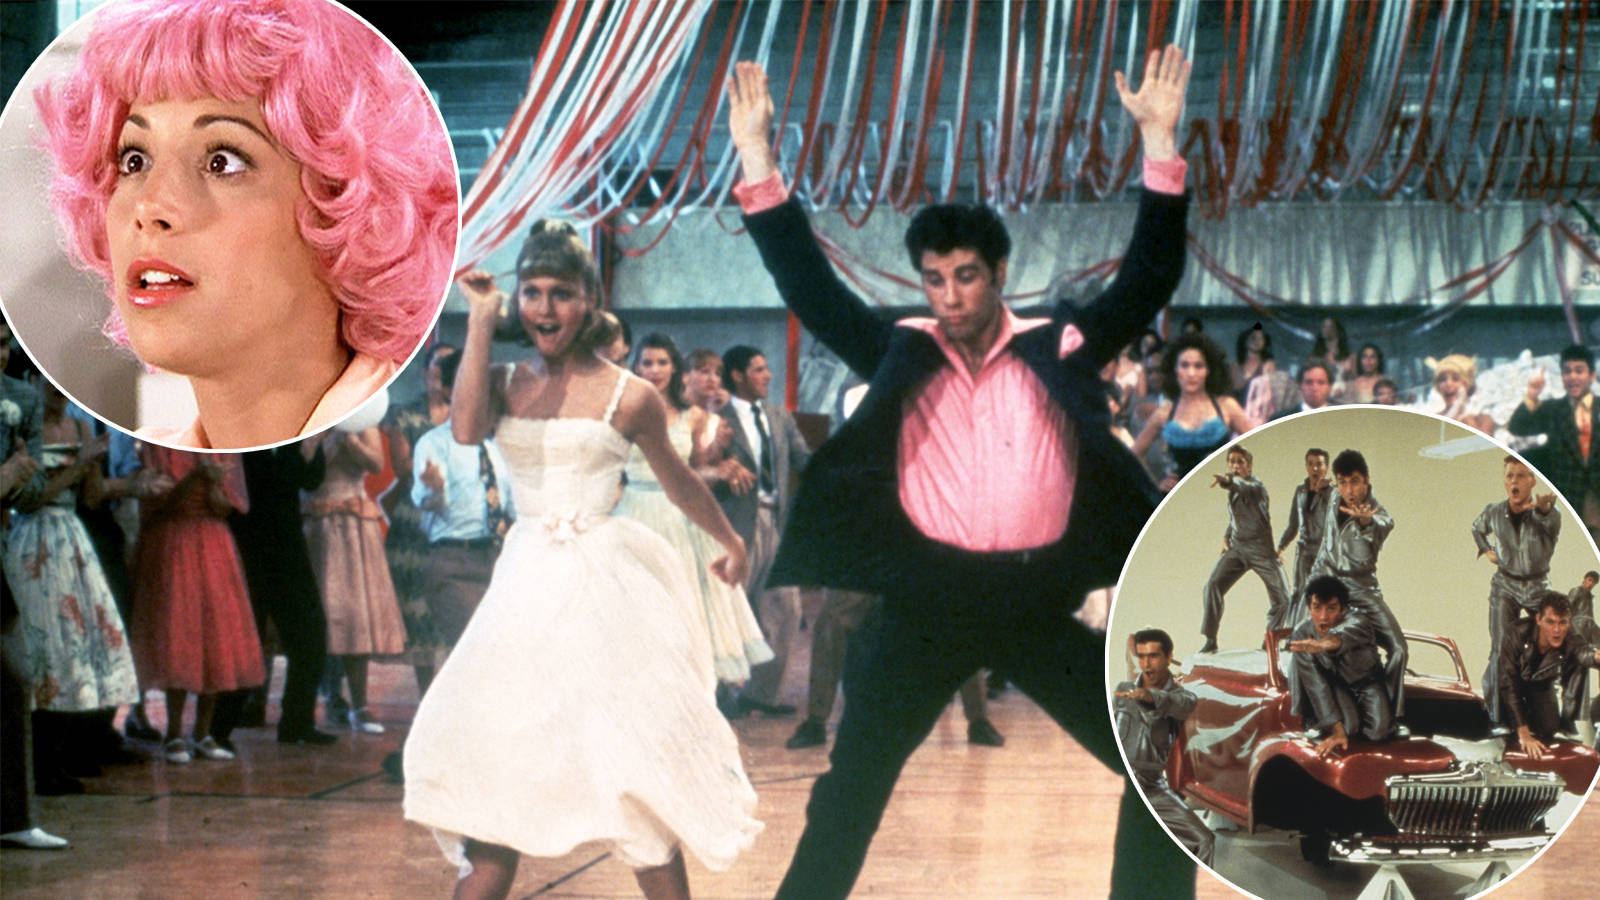 10 secrets about Grease you probably never knew - Smooth